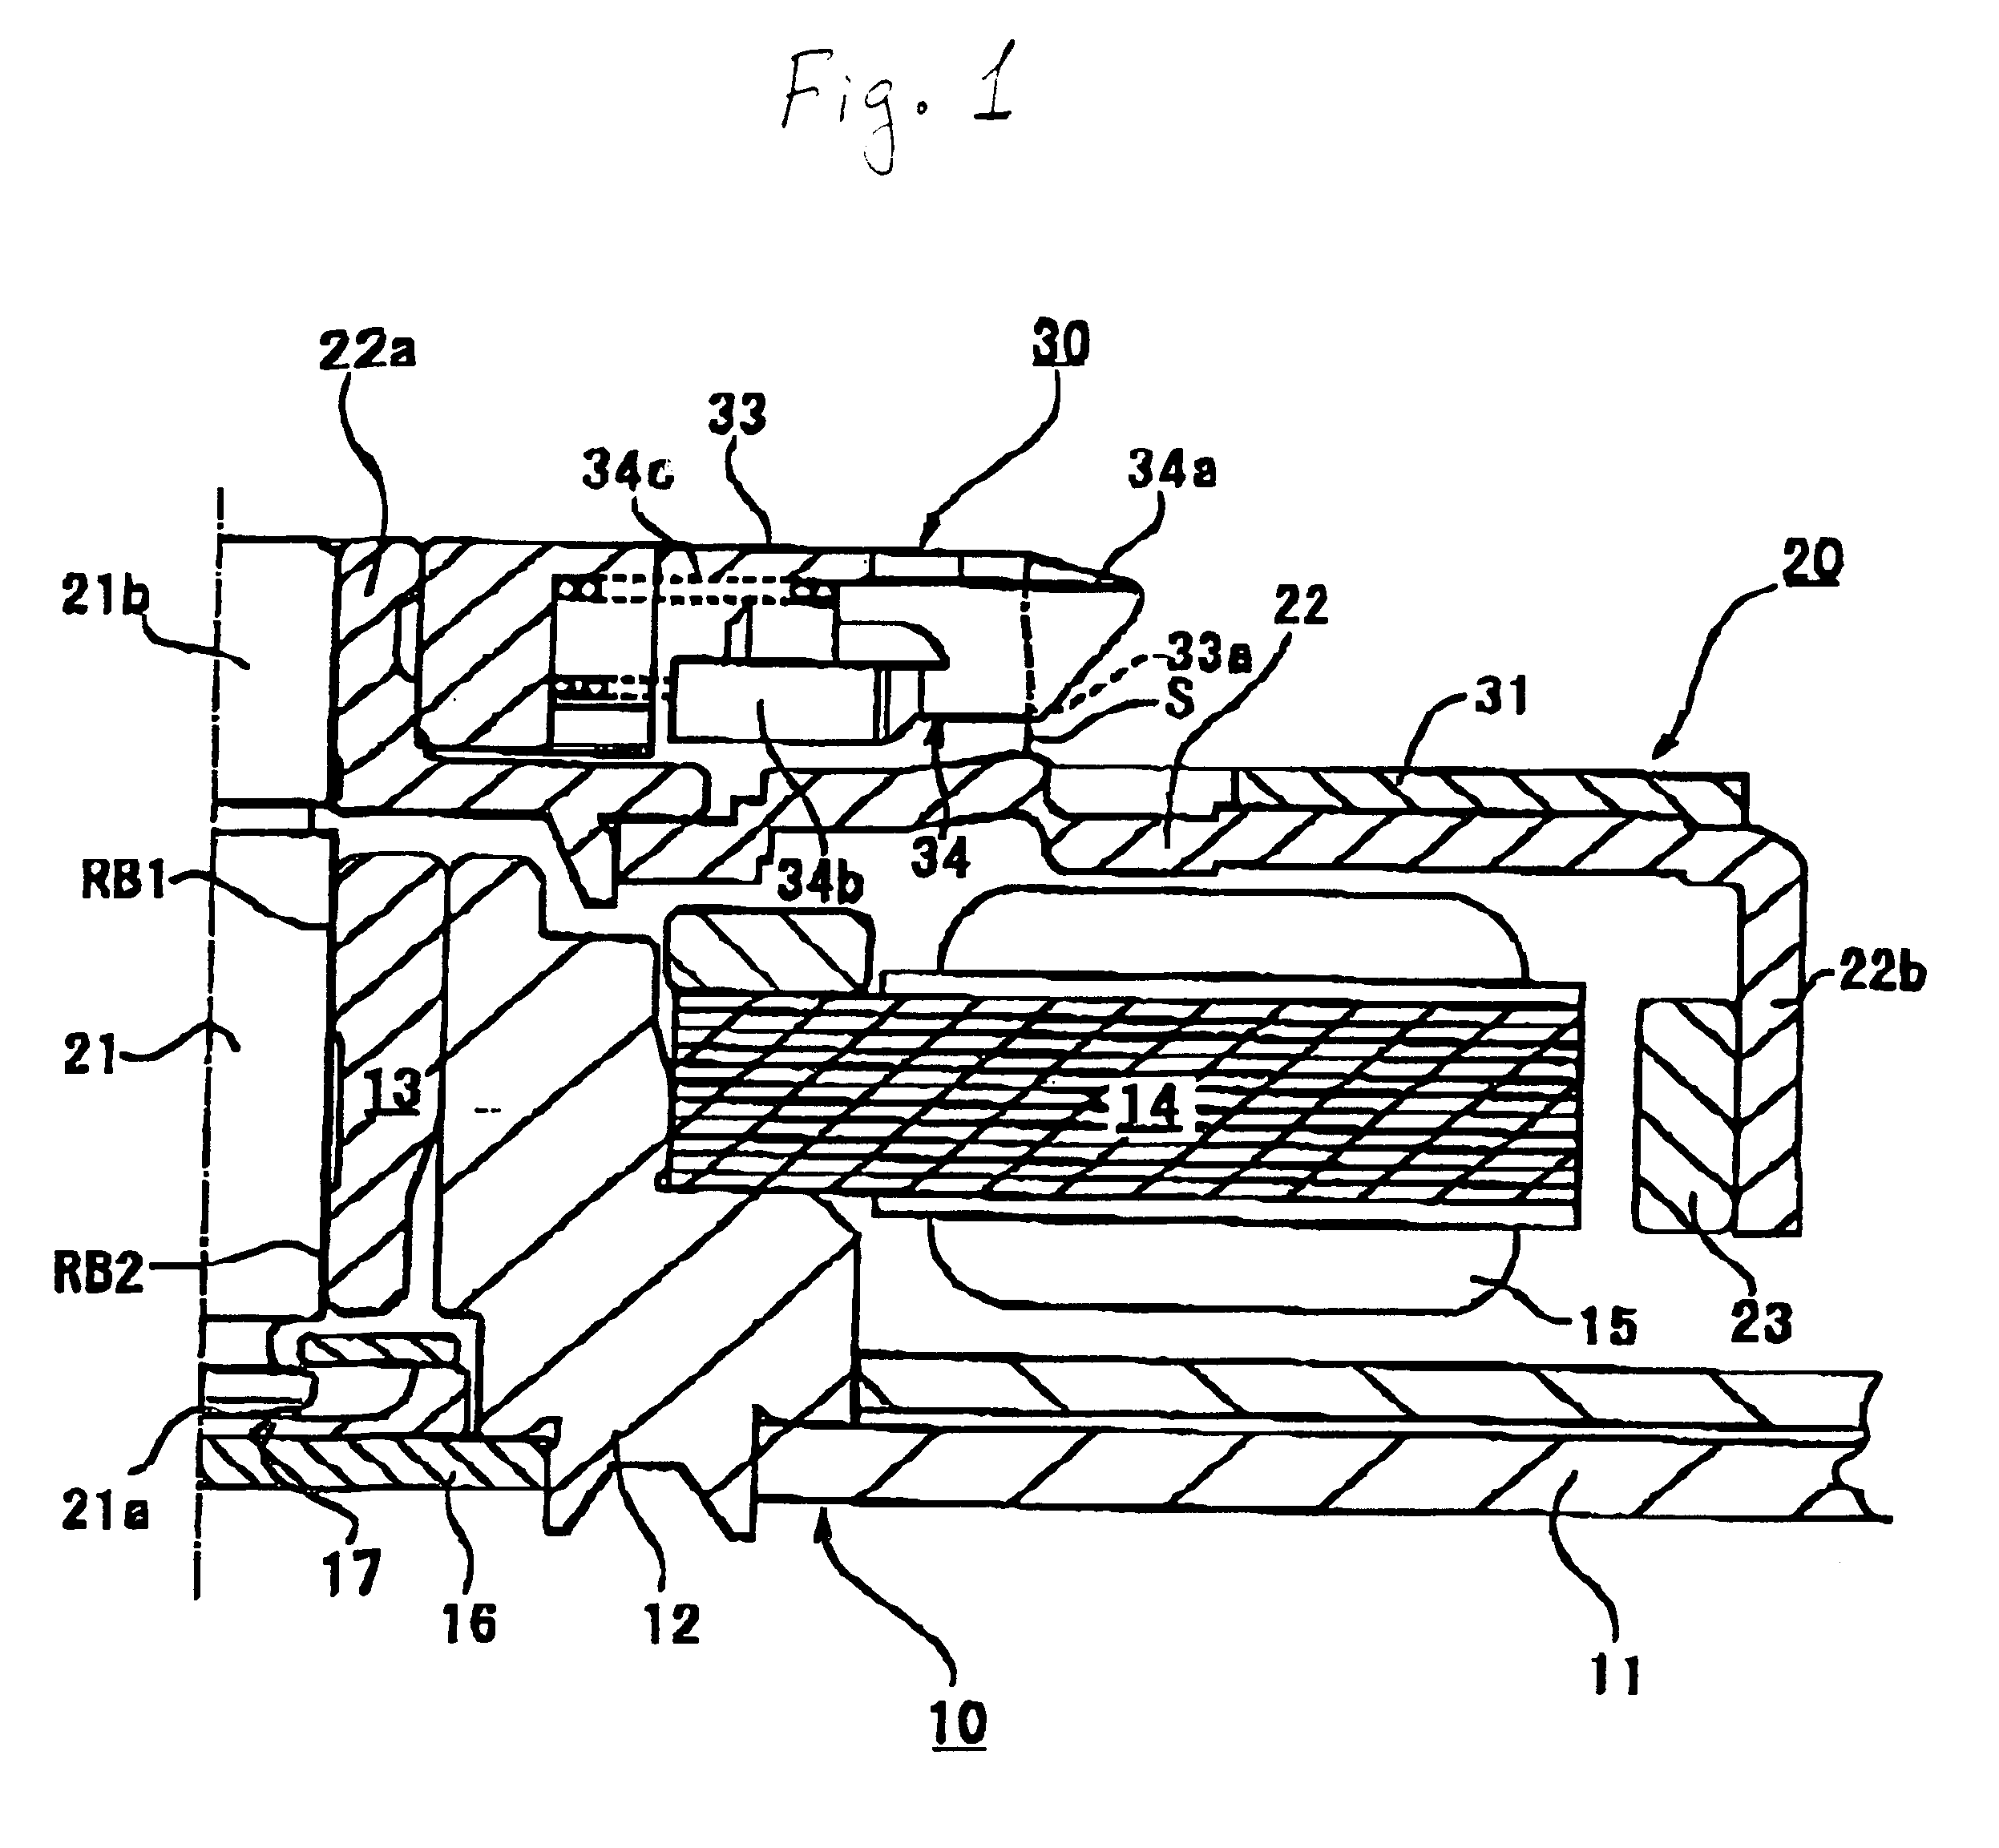 Disc clamping device